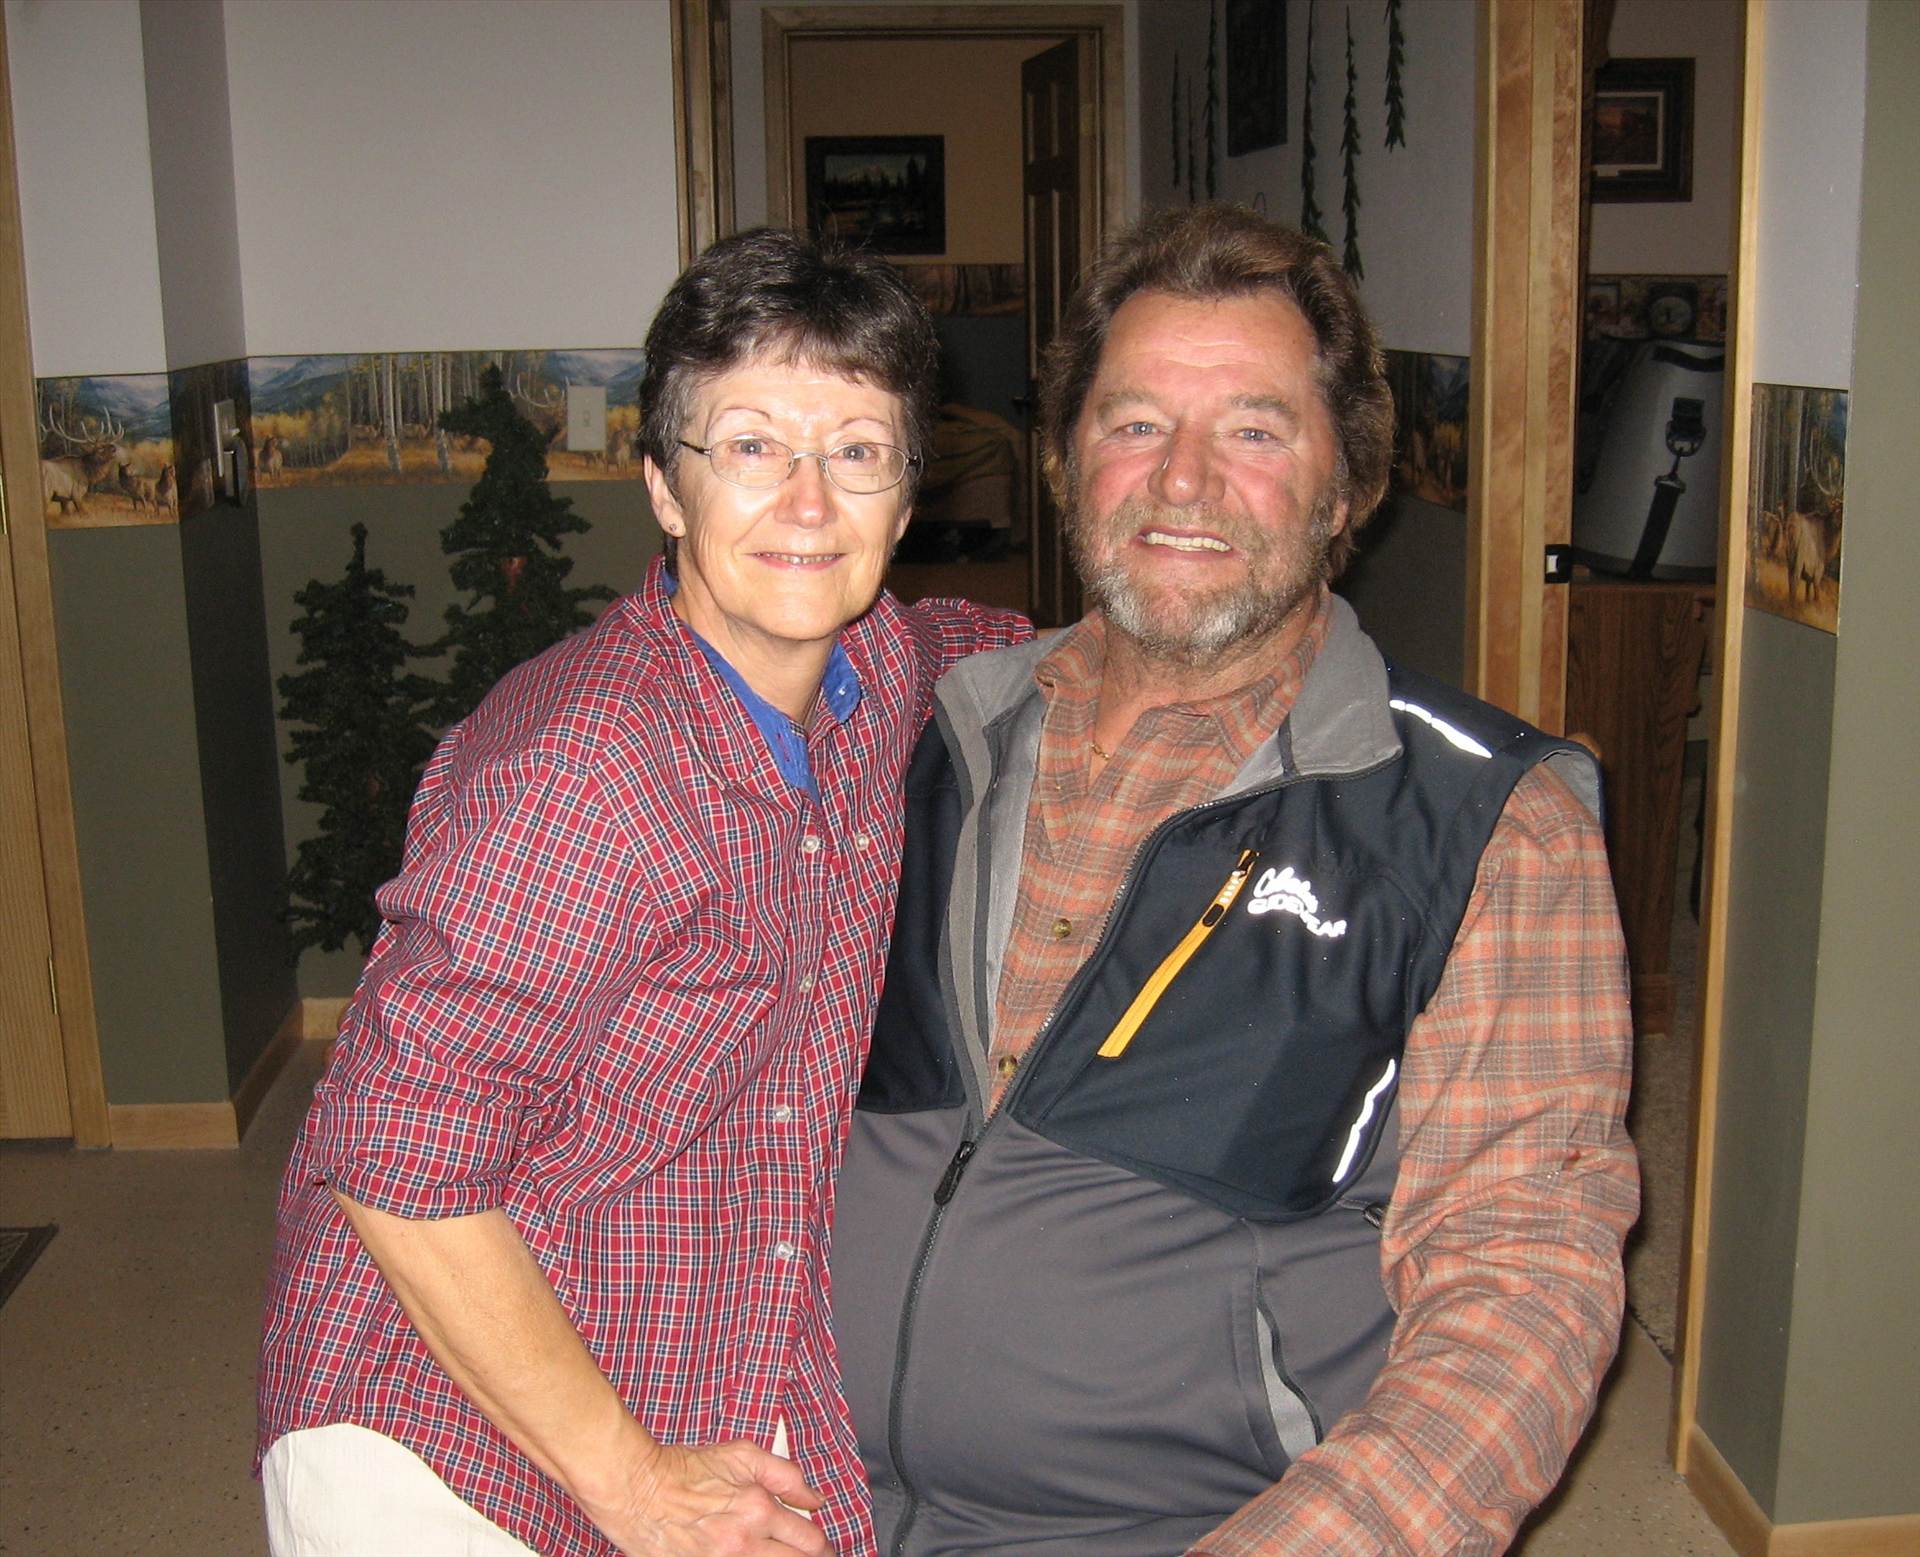 Babe_W-n-Mom_1_OCT-2015 (2).JPG - Mom and Babe Winkelman by Wild Bill Hiccup